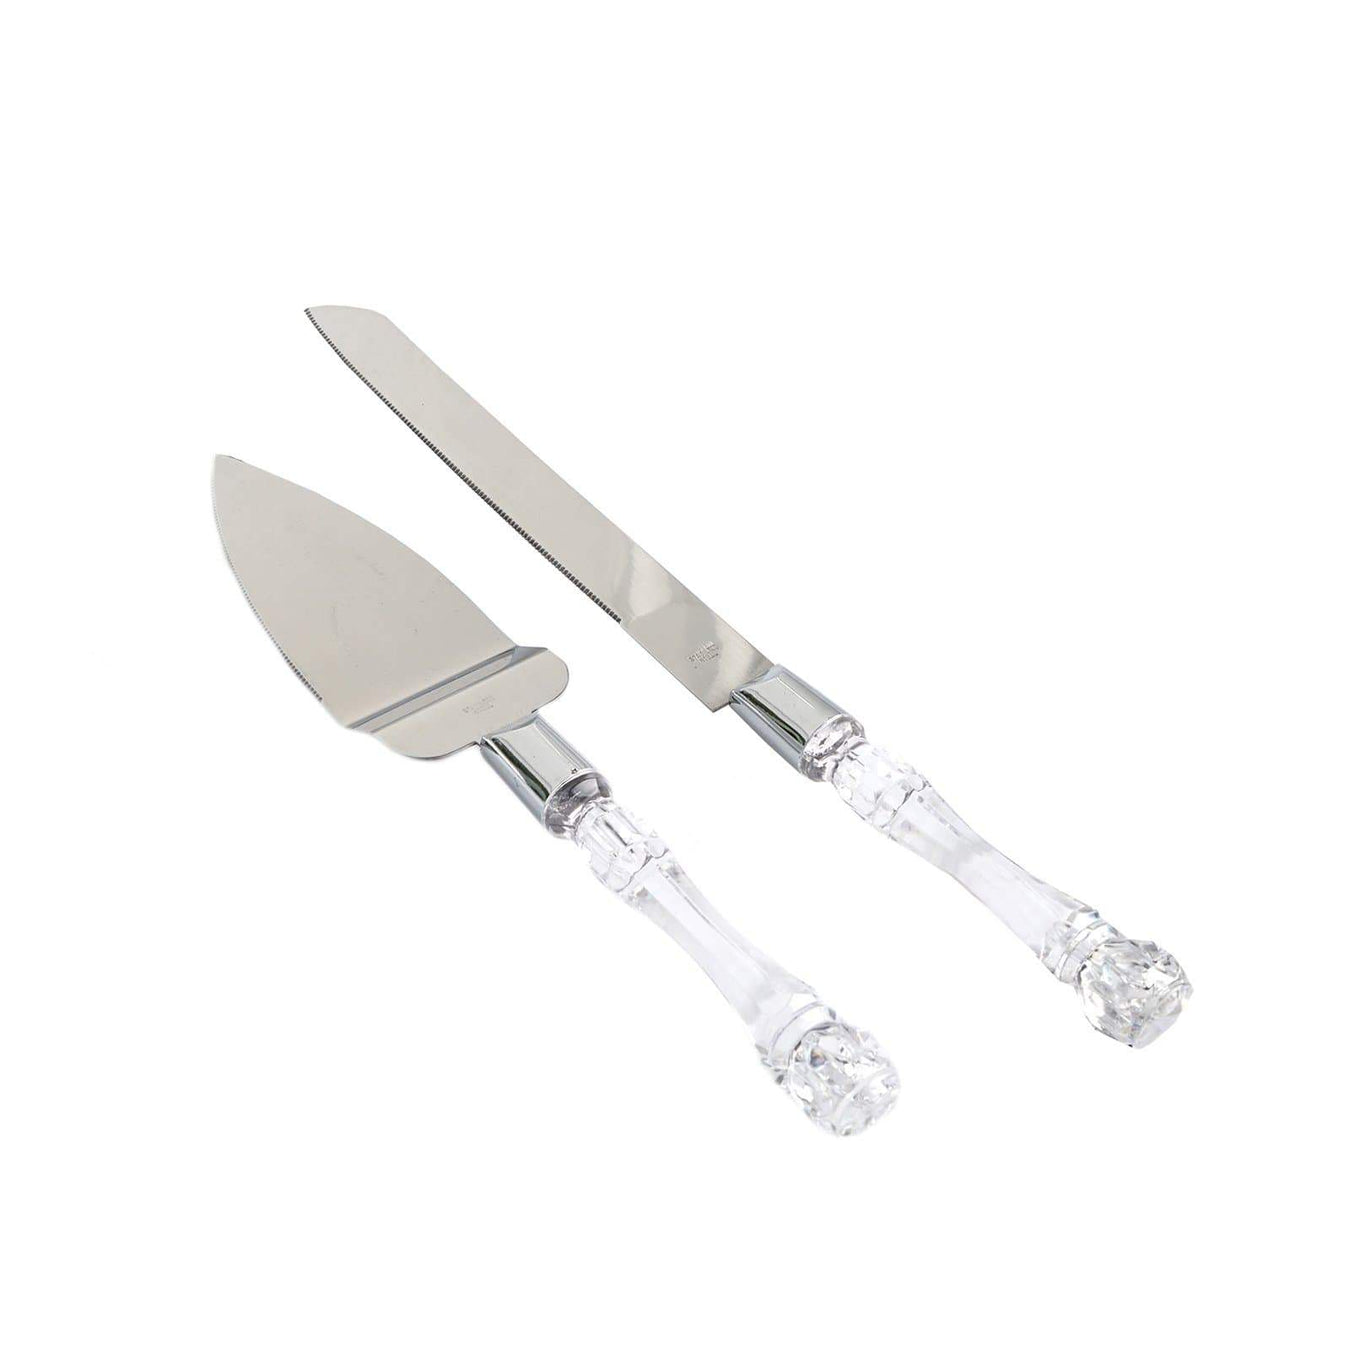 Wedding Stainless Steel Knife and Server - Cake Serving Set